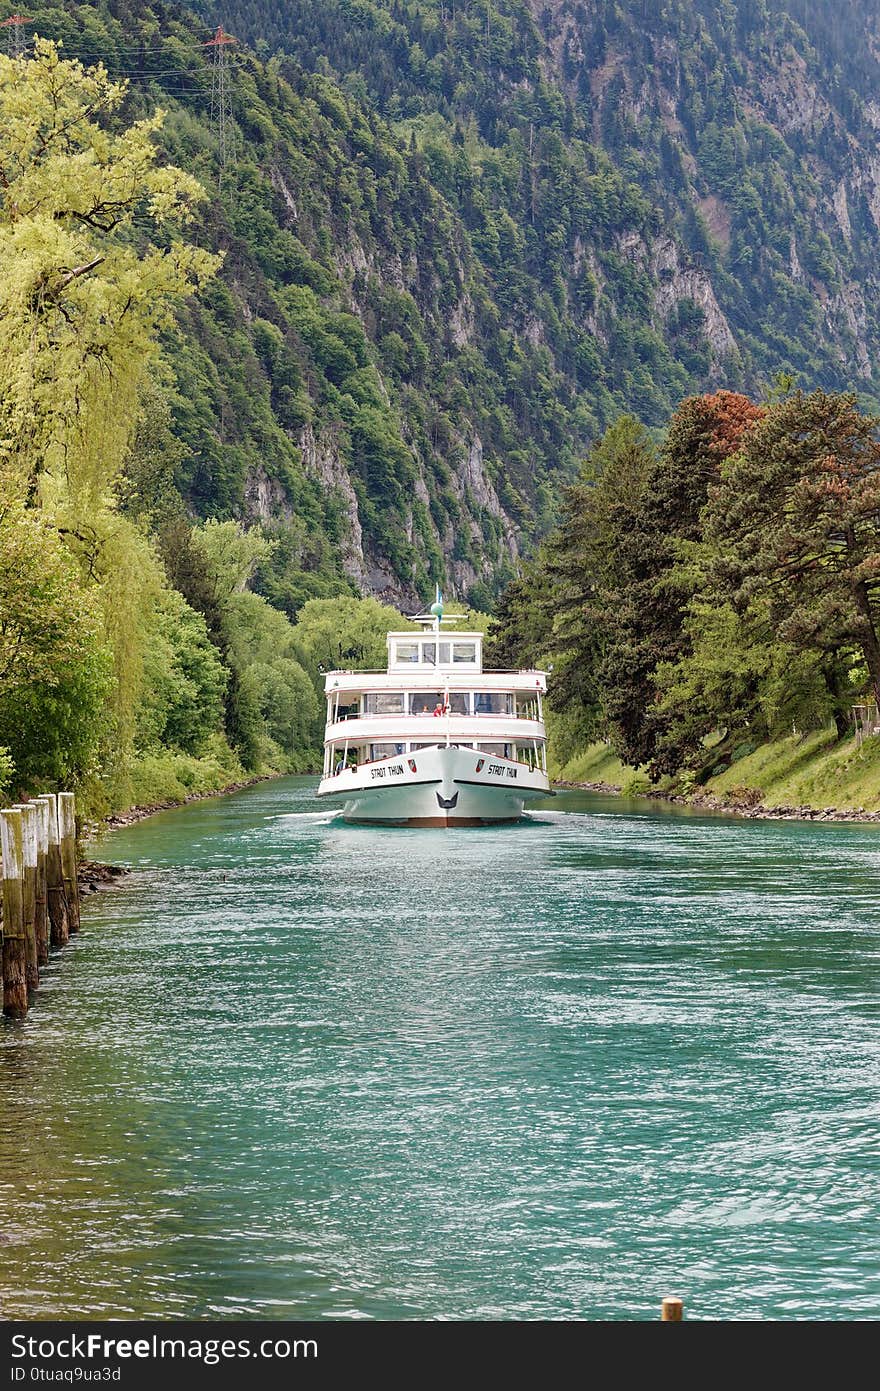 Passenger Vessel traversing the river from the Thun lake between steep verdant cliffs. Approaching its berth. Vessel takes visitors around the lake. Passenger Vessel traversing the river from the Thun lake between steep verdant cliffs. Approaching its berth. Vessel takes visitors around the lake.